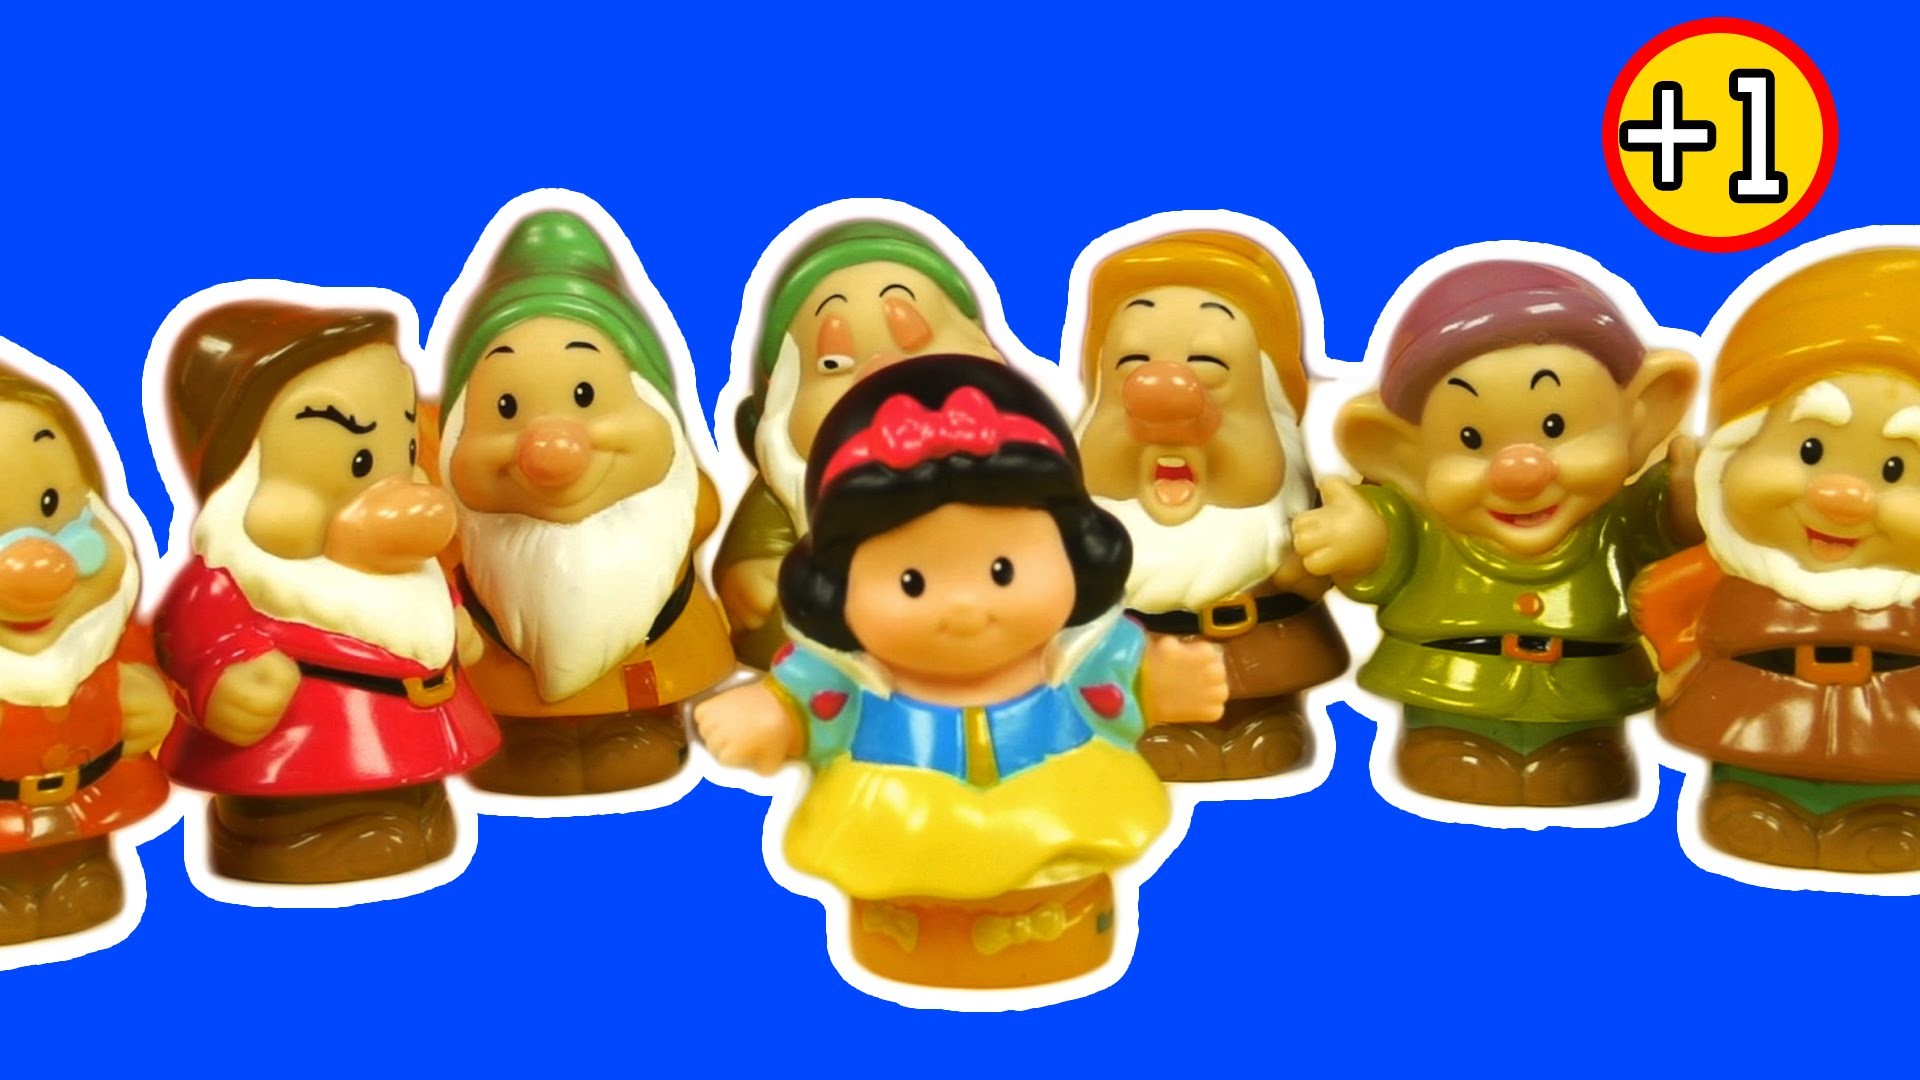 1920x1080 Disney's Snow White and the Seven Dwarfs Little People Playset Review -  YouTube